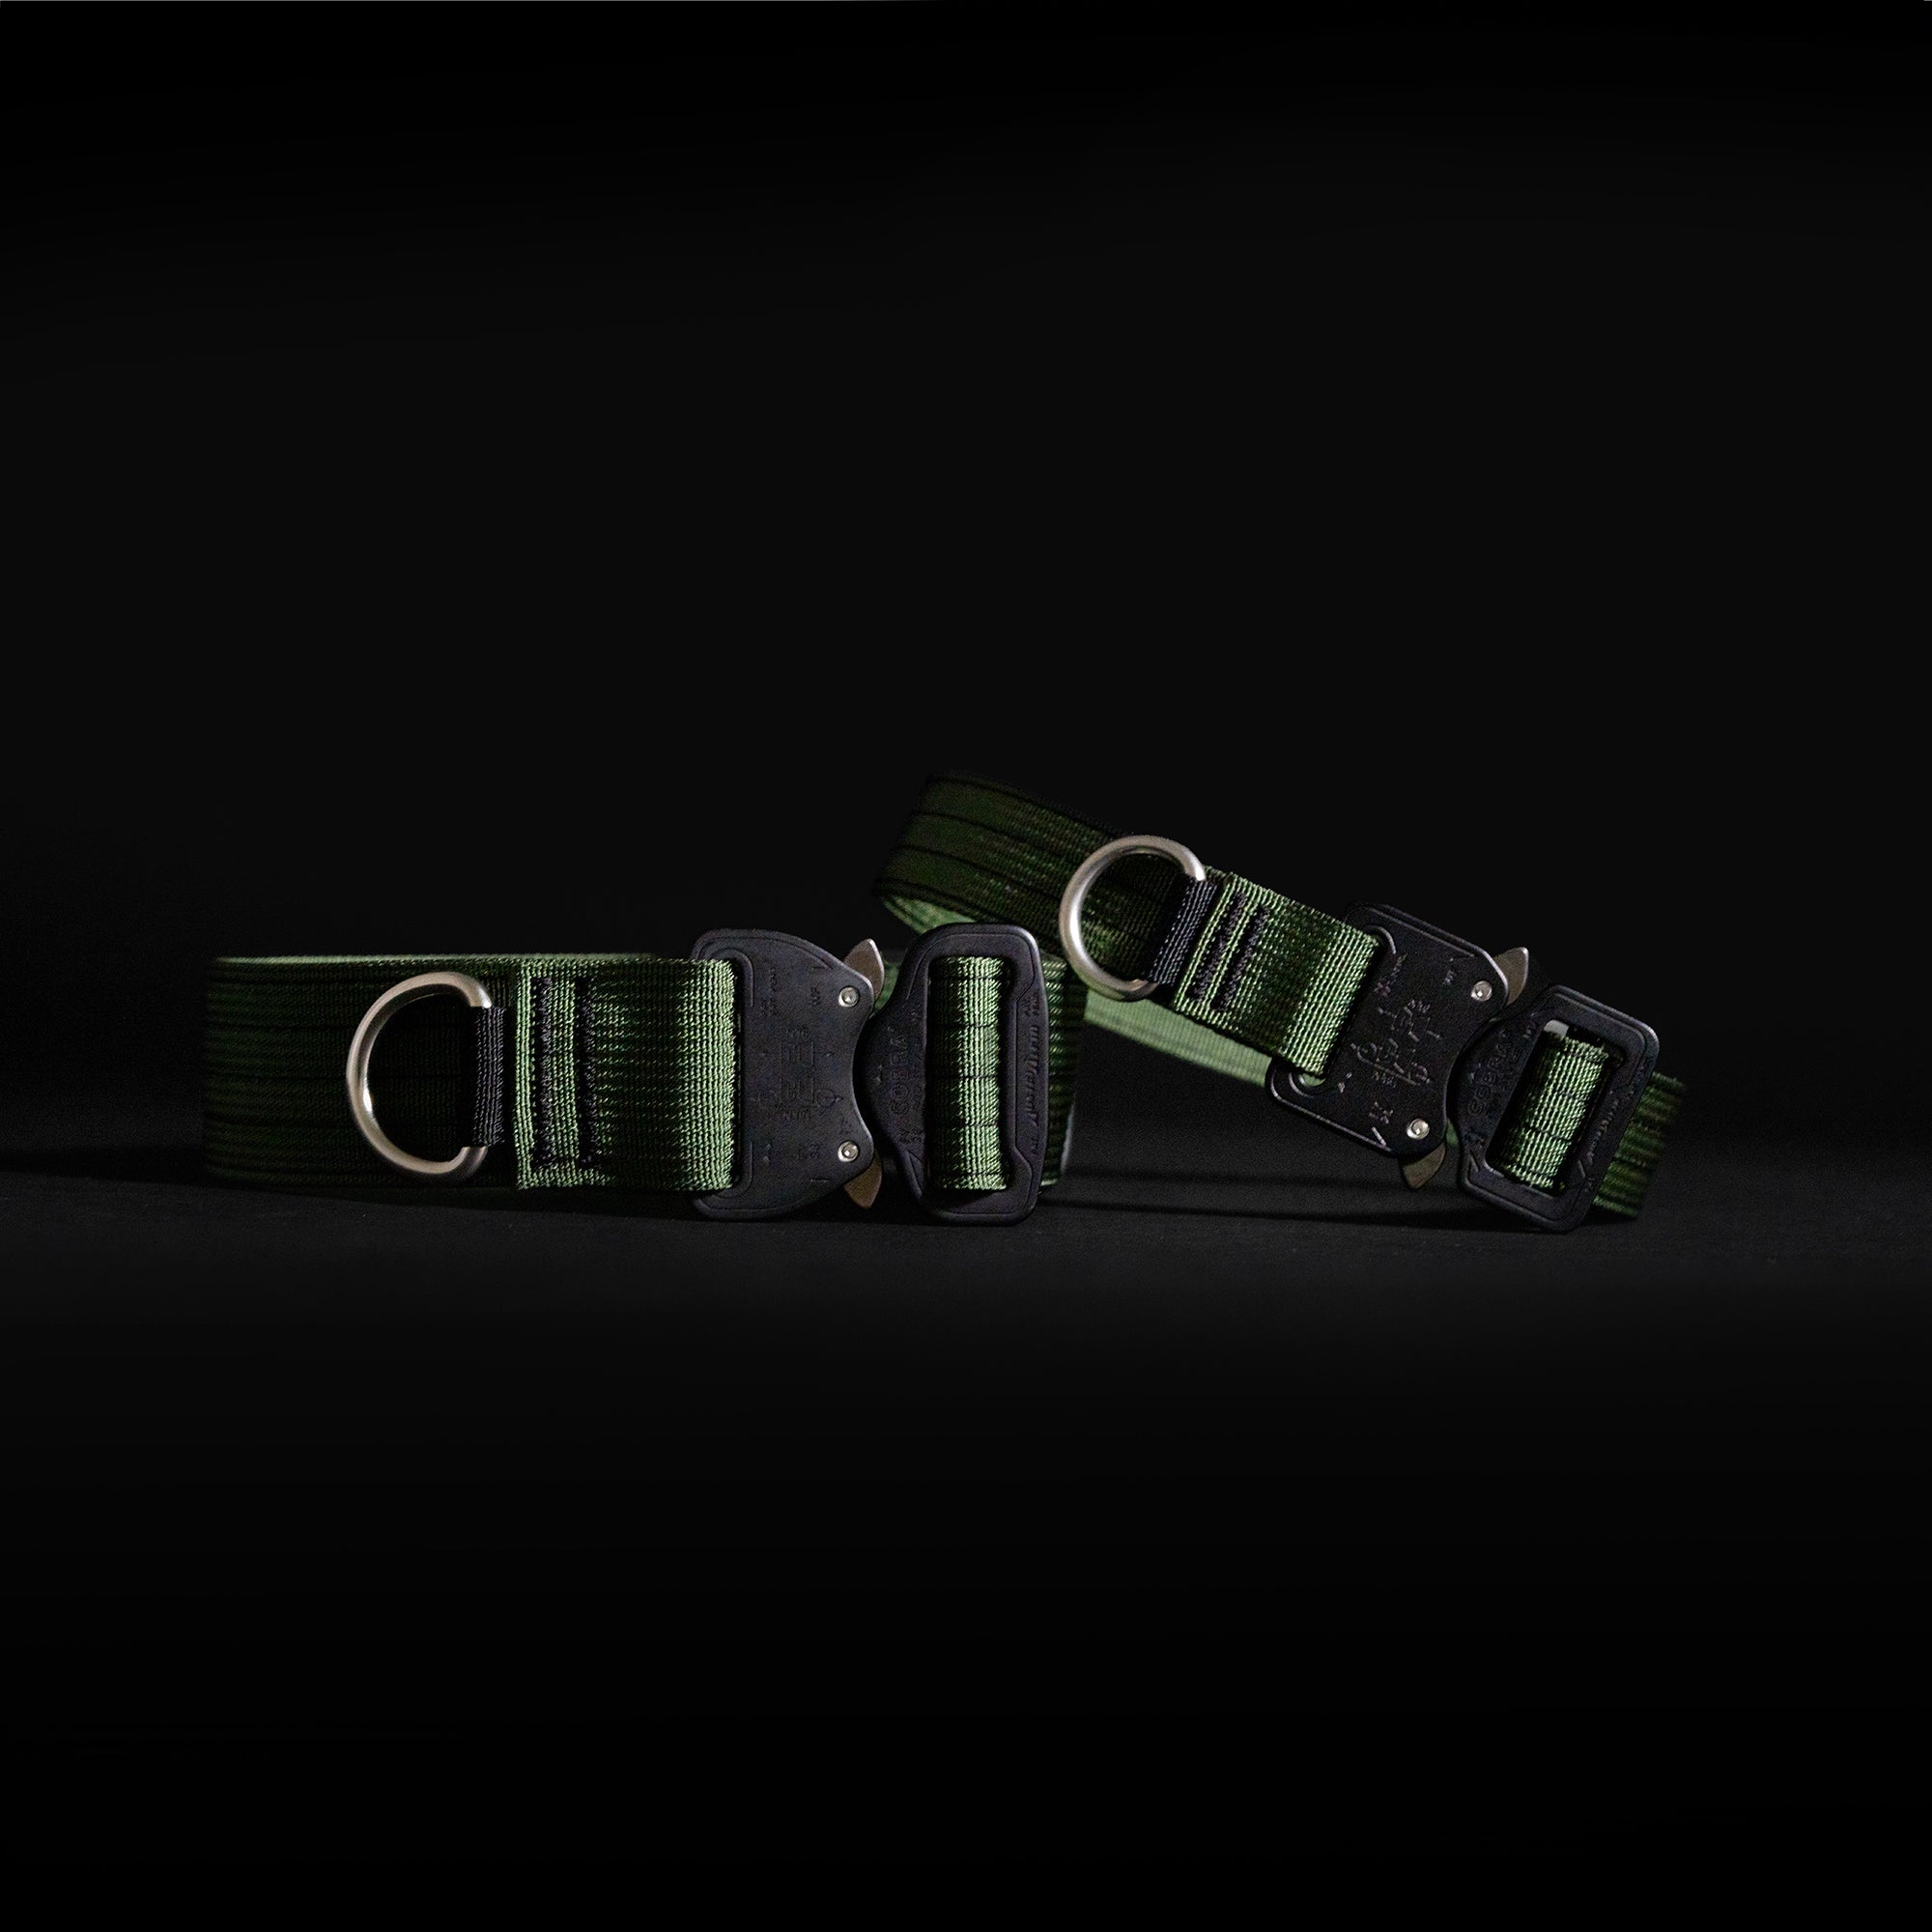 extra durable and tactical atlas pet company lifetime pro collars with lifetime warranty 